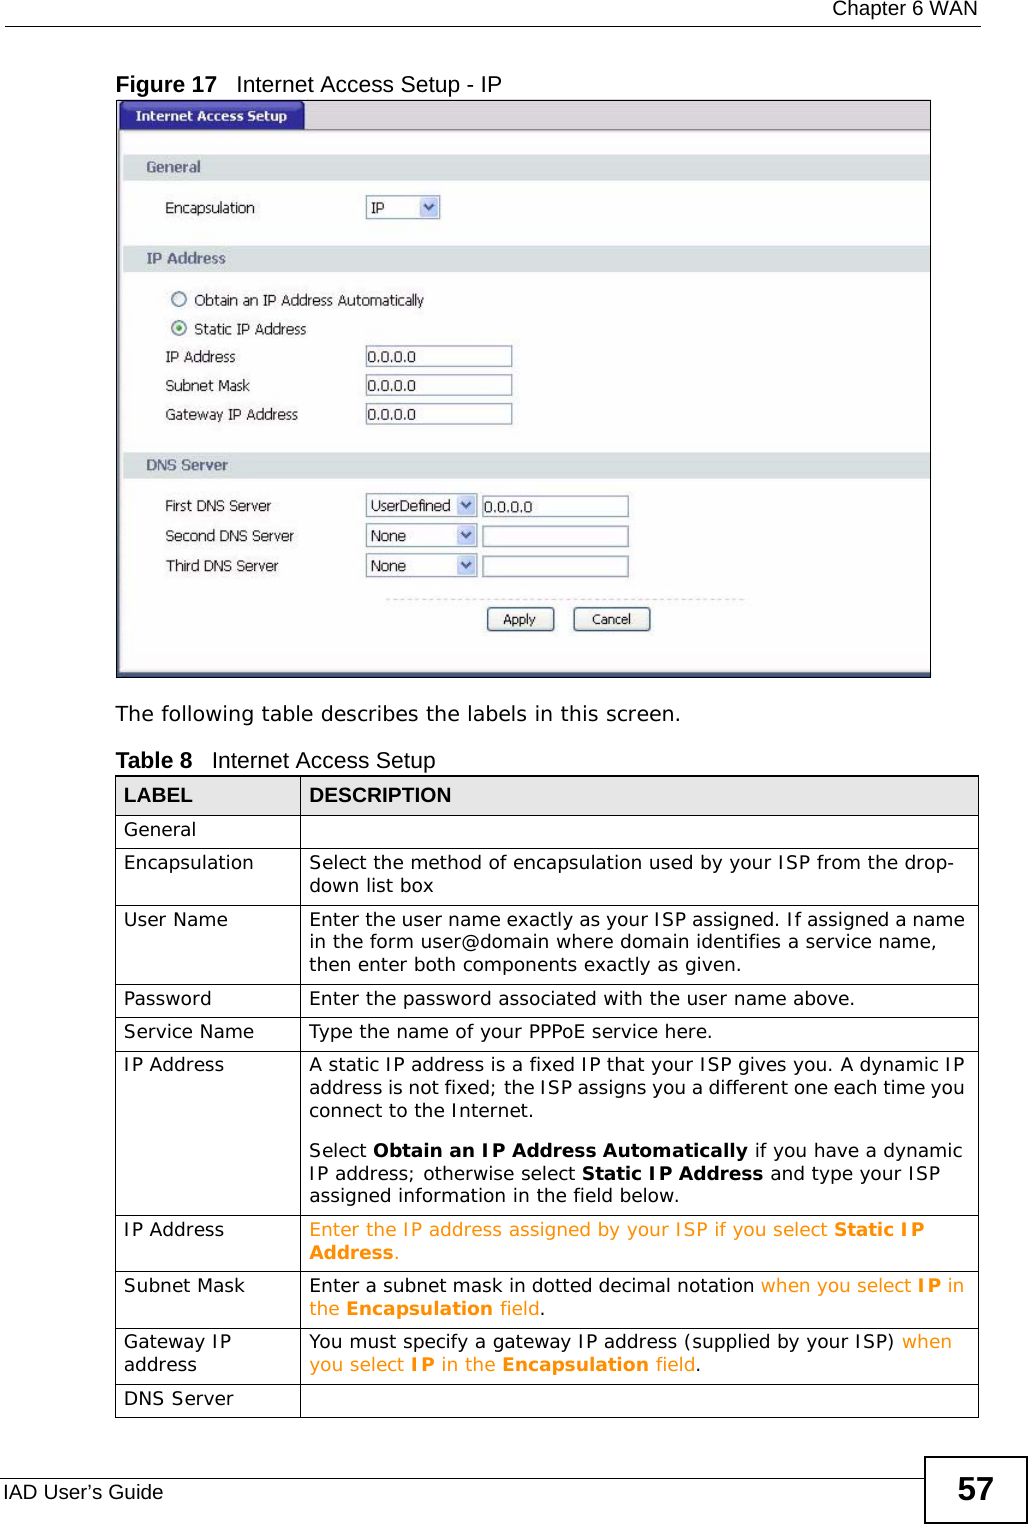  Chapter 6 WANIAD User’s Guide 57Figure 17   Internet Access Setup - IPThe following table describes the labels in this screen.  Table 8   Internet Access SetupLABEL DESCRIPTIONGeneralEncapsulation Select the method of encapsulation used by your ISP from the drop-down list boxUser Name Enter the user name exactly as your ISP assigned. If assigned a name in the form user@domain where domain identifies a service name, then enter both components exactly as given.Password Enter the password associated with the user name above.Service Name Type the name of your PPPoE service here.IP Address A static IP address is a fixed IP that your ISP gives you. A dynamic IP address is not fixed; the ISP assigns you a different one each time you connect to the Internet. Select Obtain an IP Address Automatically if you have a dynamic IP address; otherwise select Static IP Address and type your ISP assigned information in the field below. IP Address Enter the IP address assigned by your ISP if you select Static IP Address.Subnet Mask Enter a subnet mask in dotted decimal notation when you select IP in the Encapsulation field.Gateway IP address You must specify a gateway IP address (supplied by your ISP) when you select IP in the Encapsulation field.DNS Server